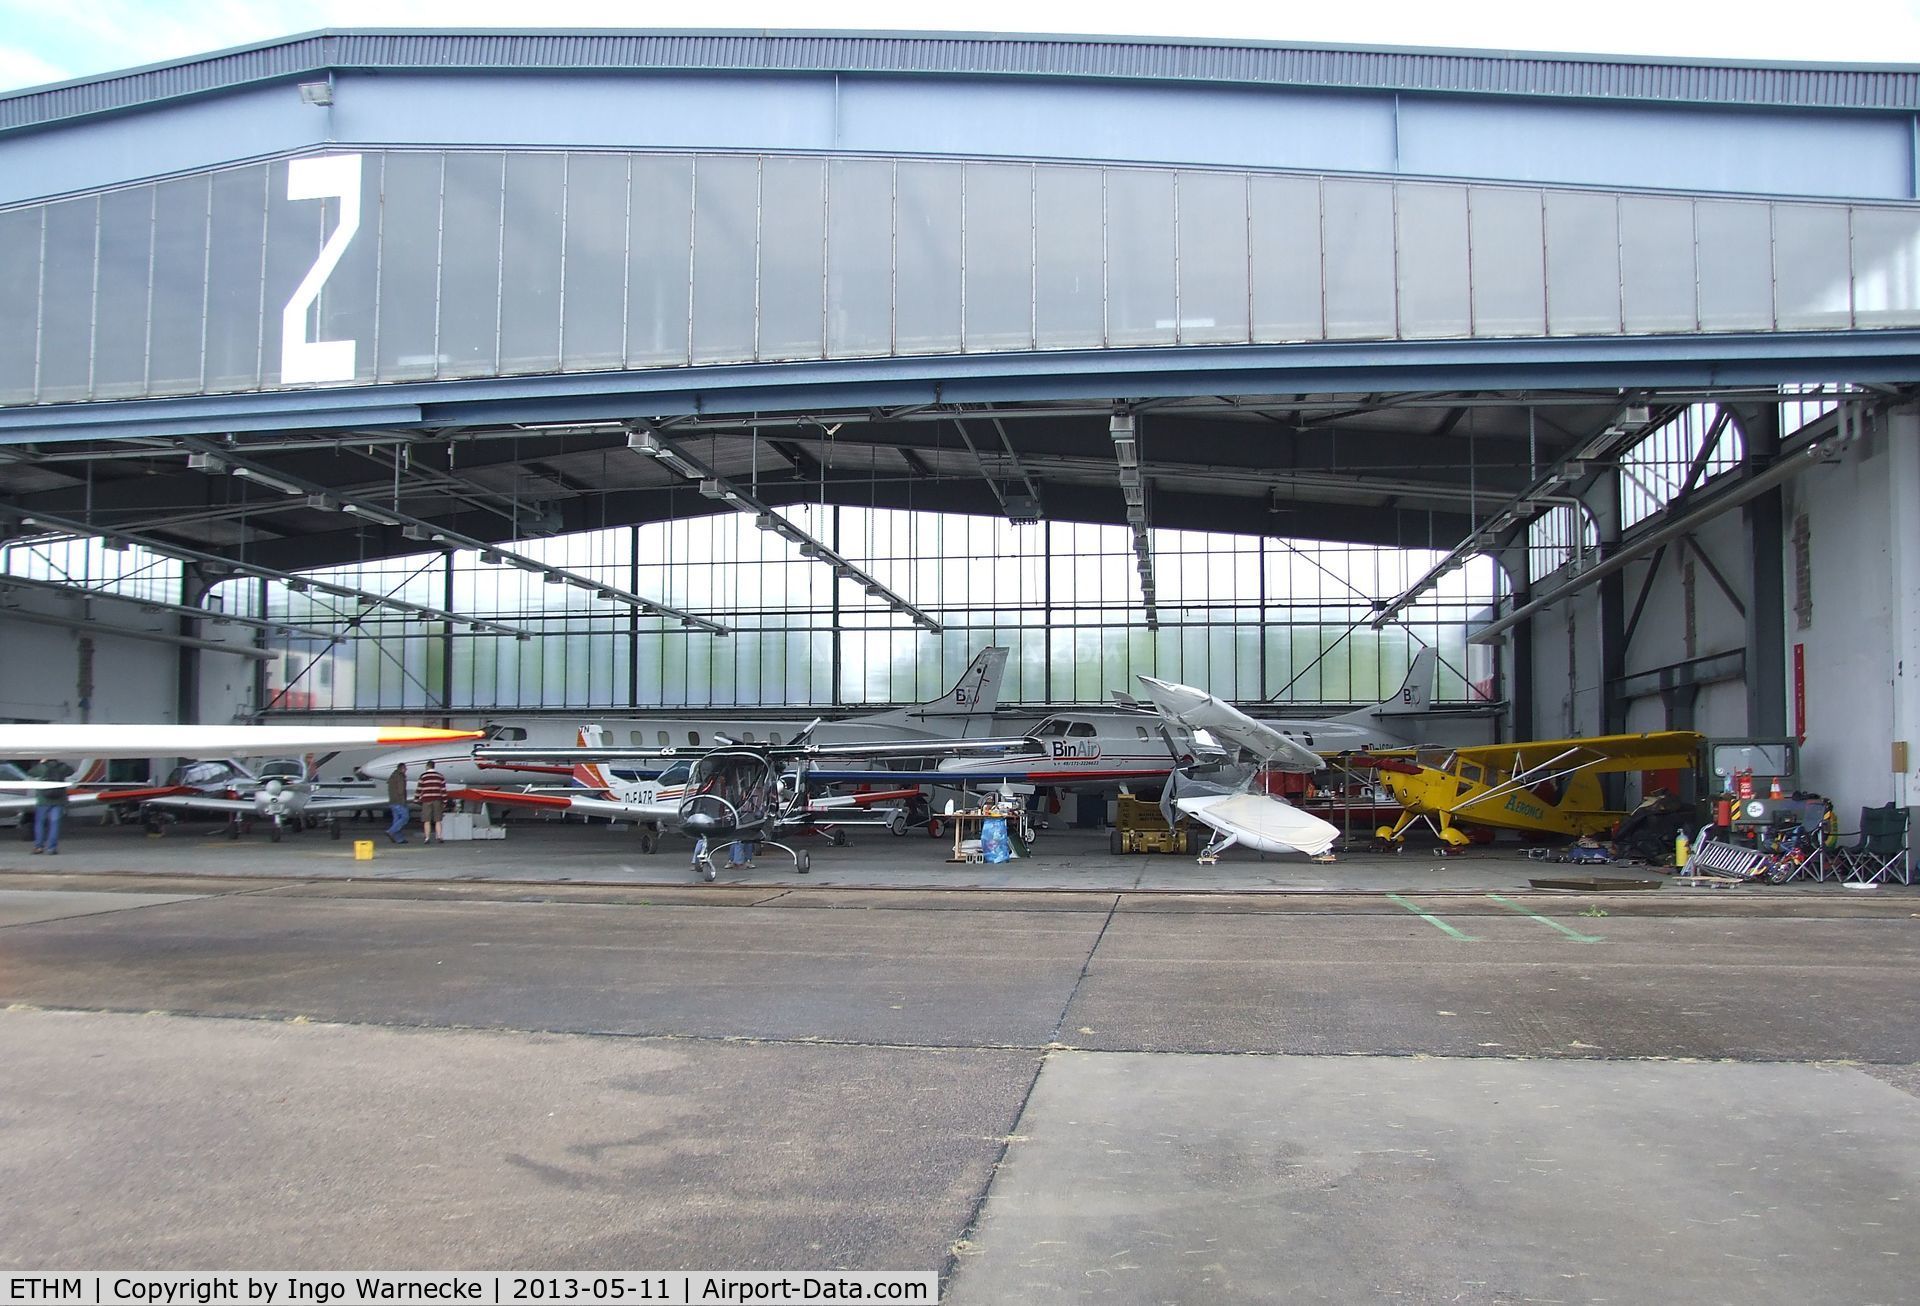 Mendig Army Base Airport, Niedermendig Germany (ETHM) - No 2 hangar of the Fliegendes Museum Mendig (Flying Museum) during an open day at former German Army Aviation base, now civilian Mendig airfield 